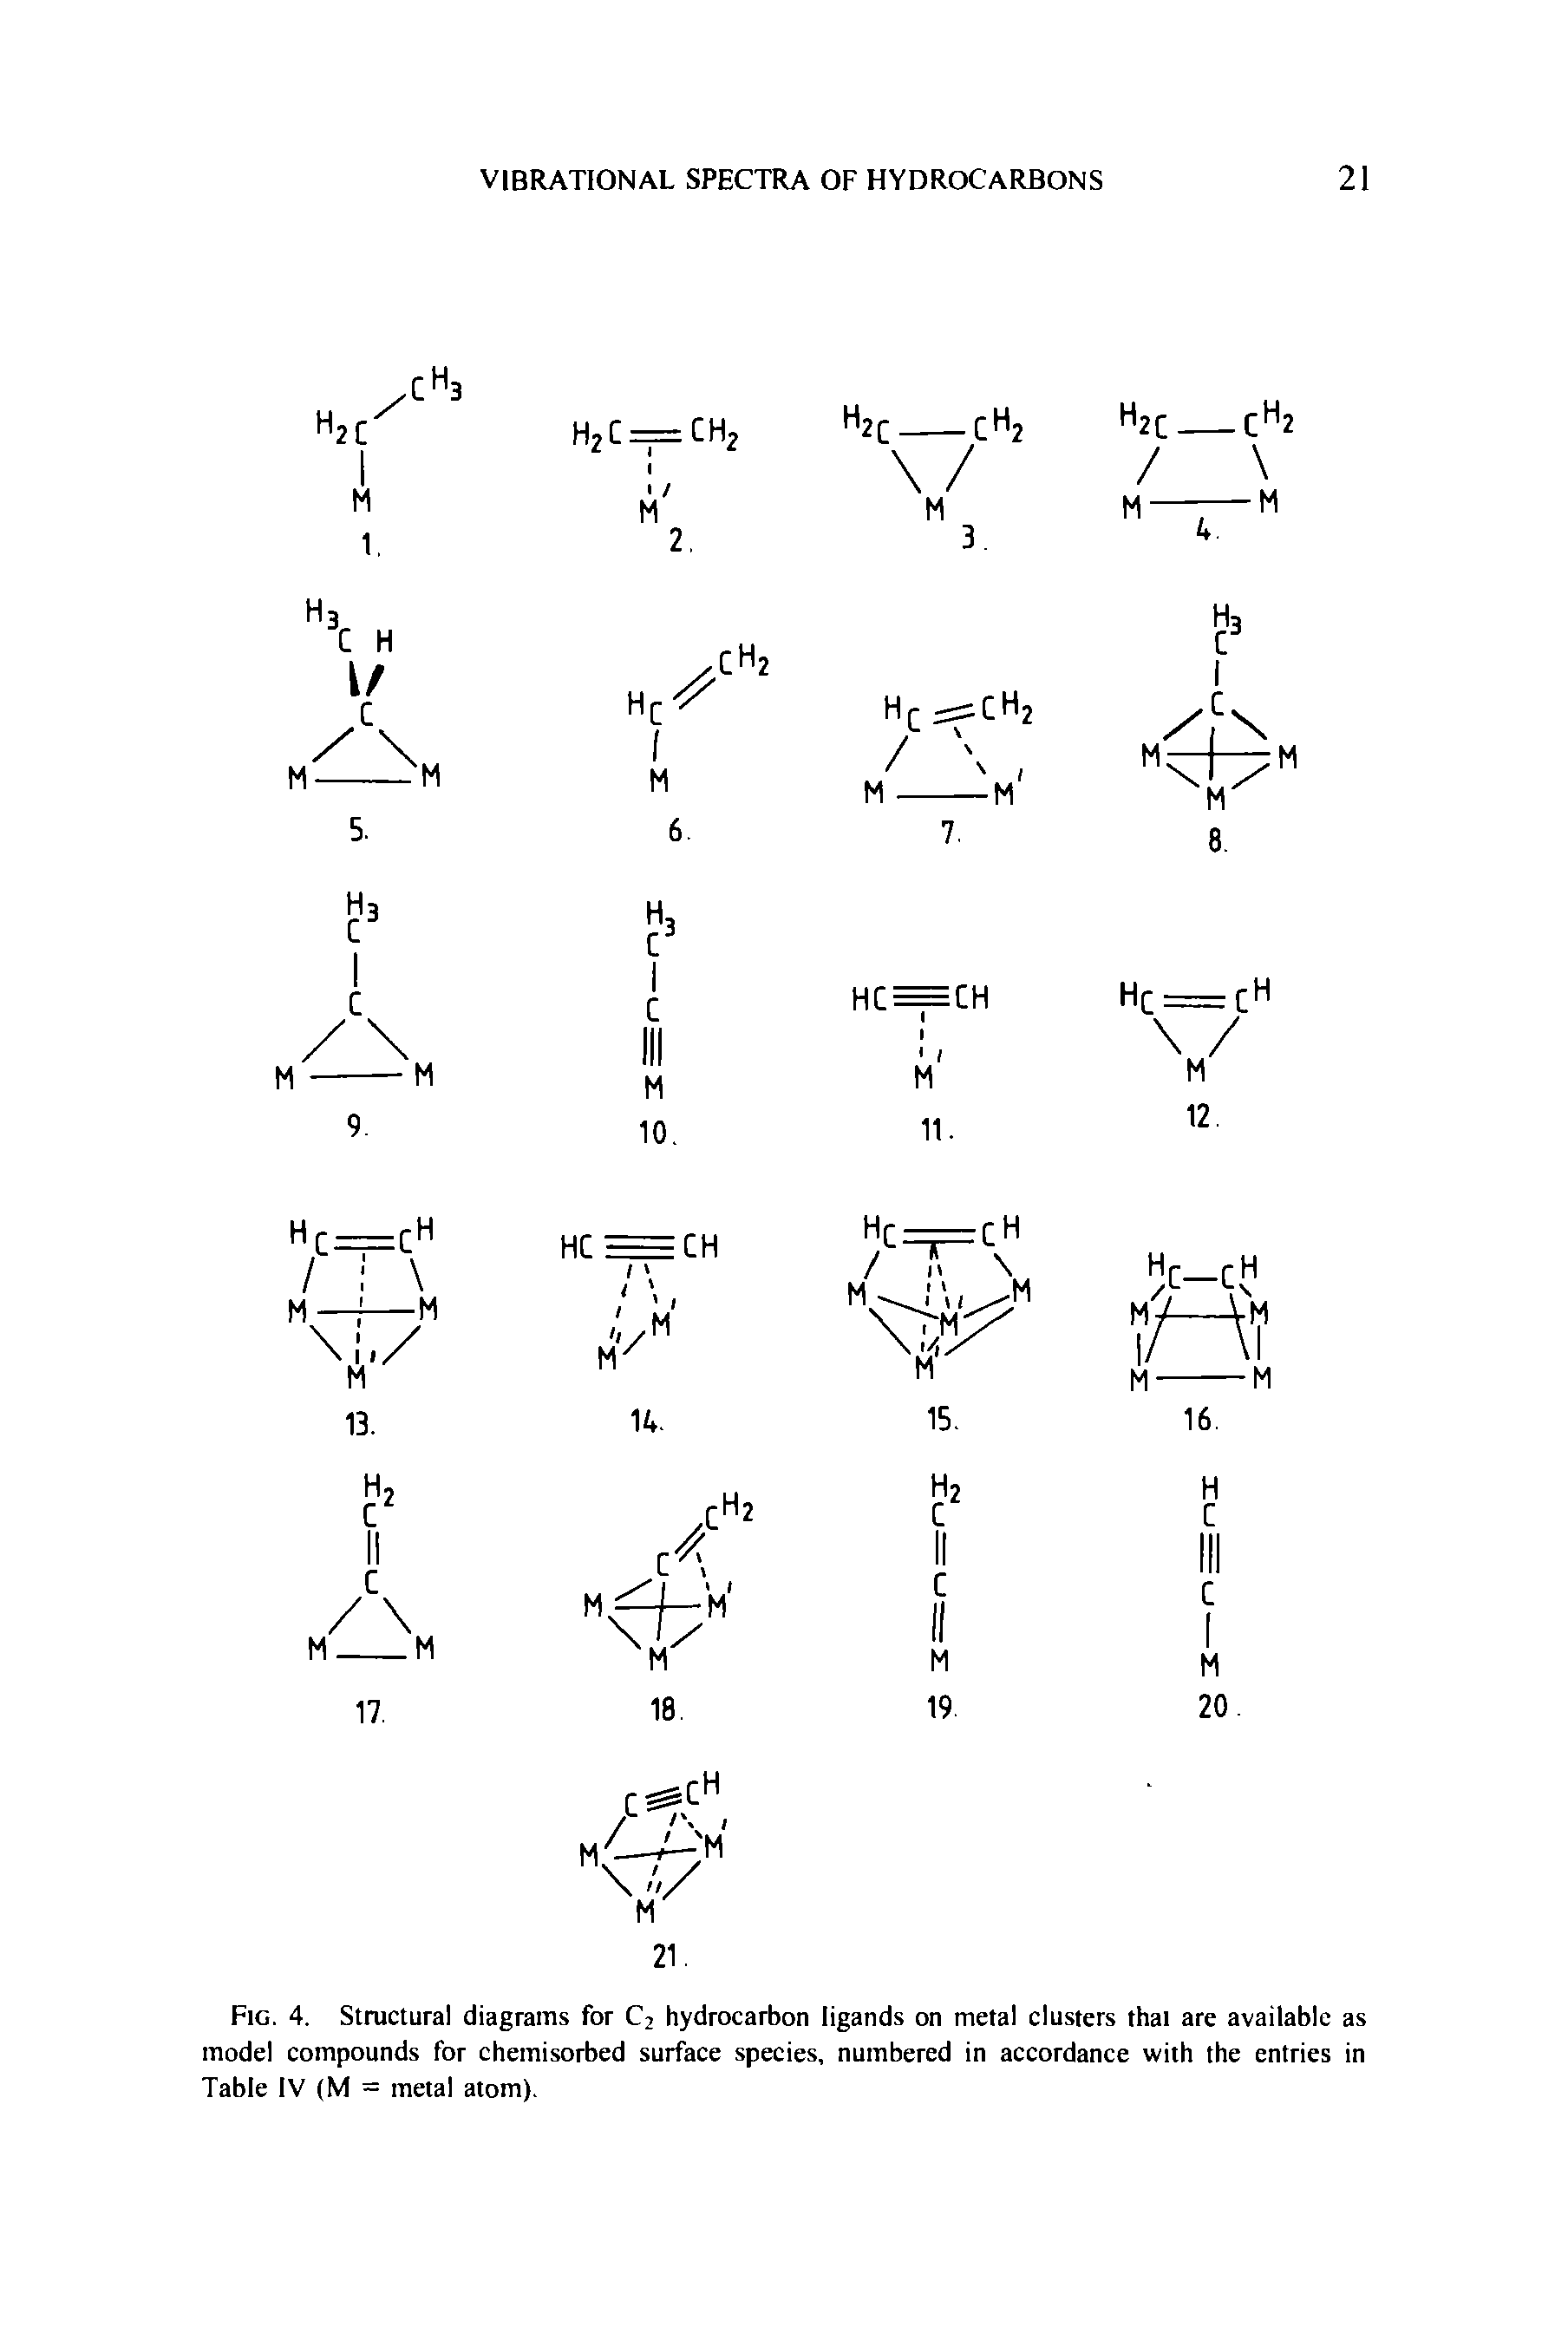 Fig. 4. Structural diagrams for C2 hydrocarbon ligands on metal clusters that are available as model compounds for chemisorbed surface species, numbered in accordance with the entries in Table IV (M = metal atom).